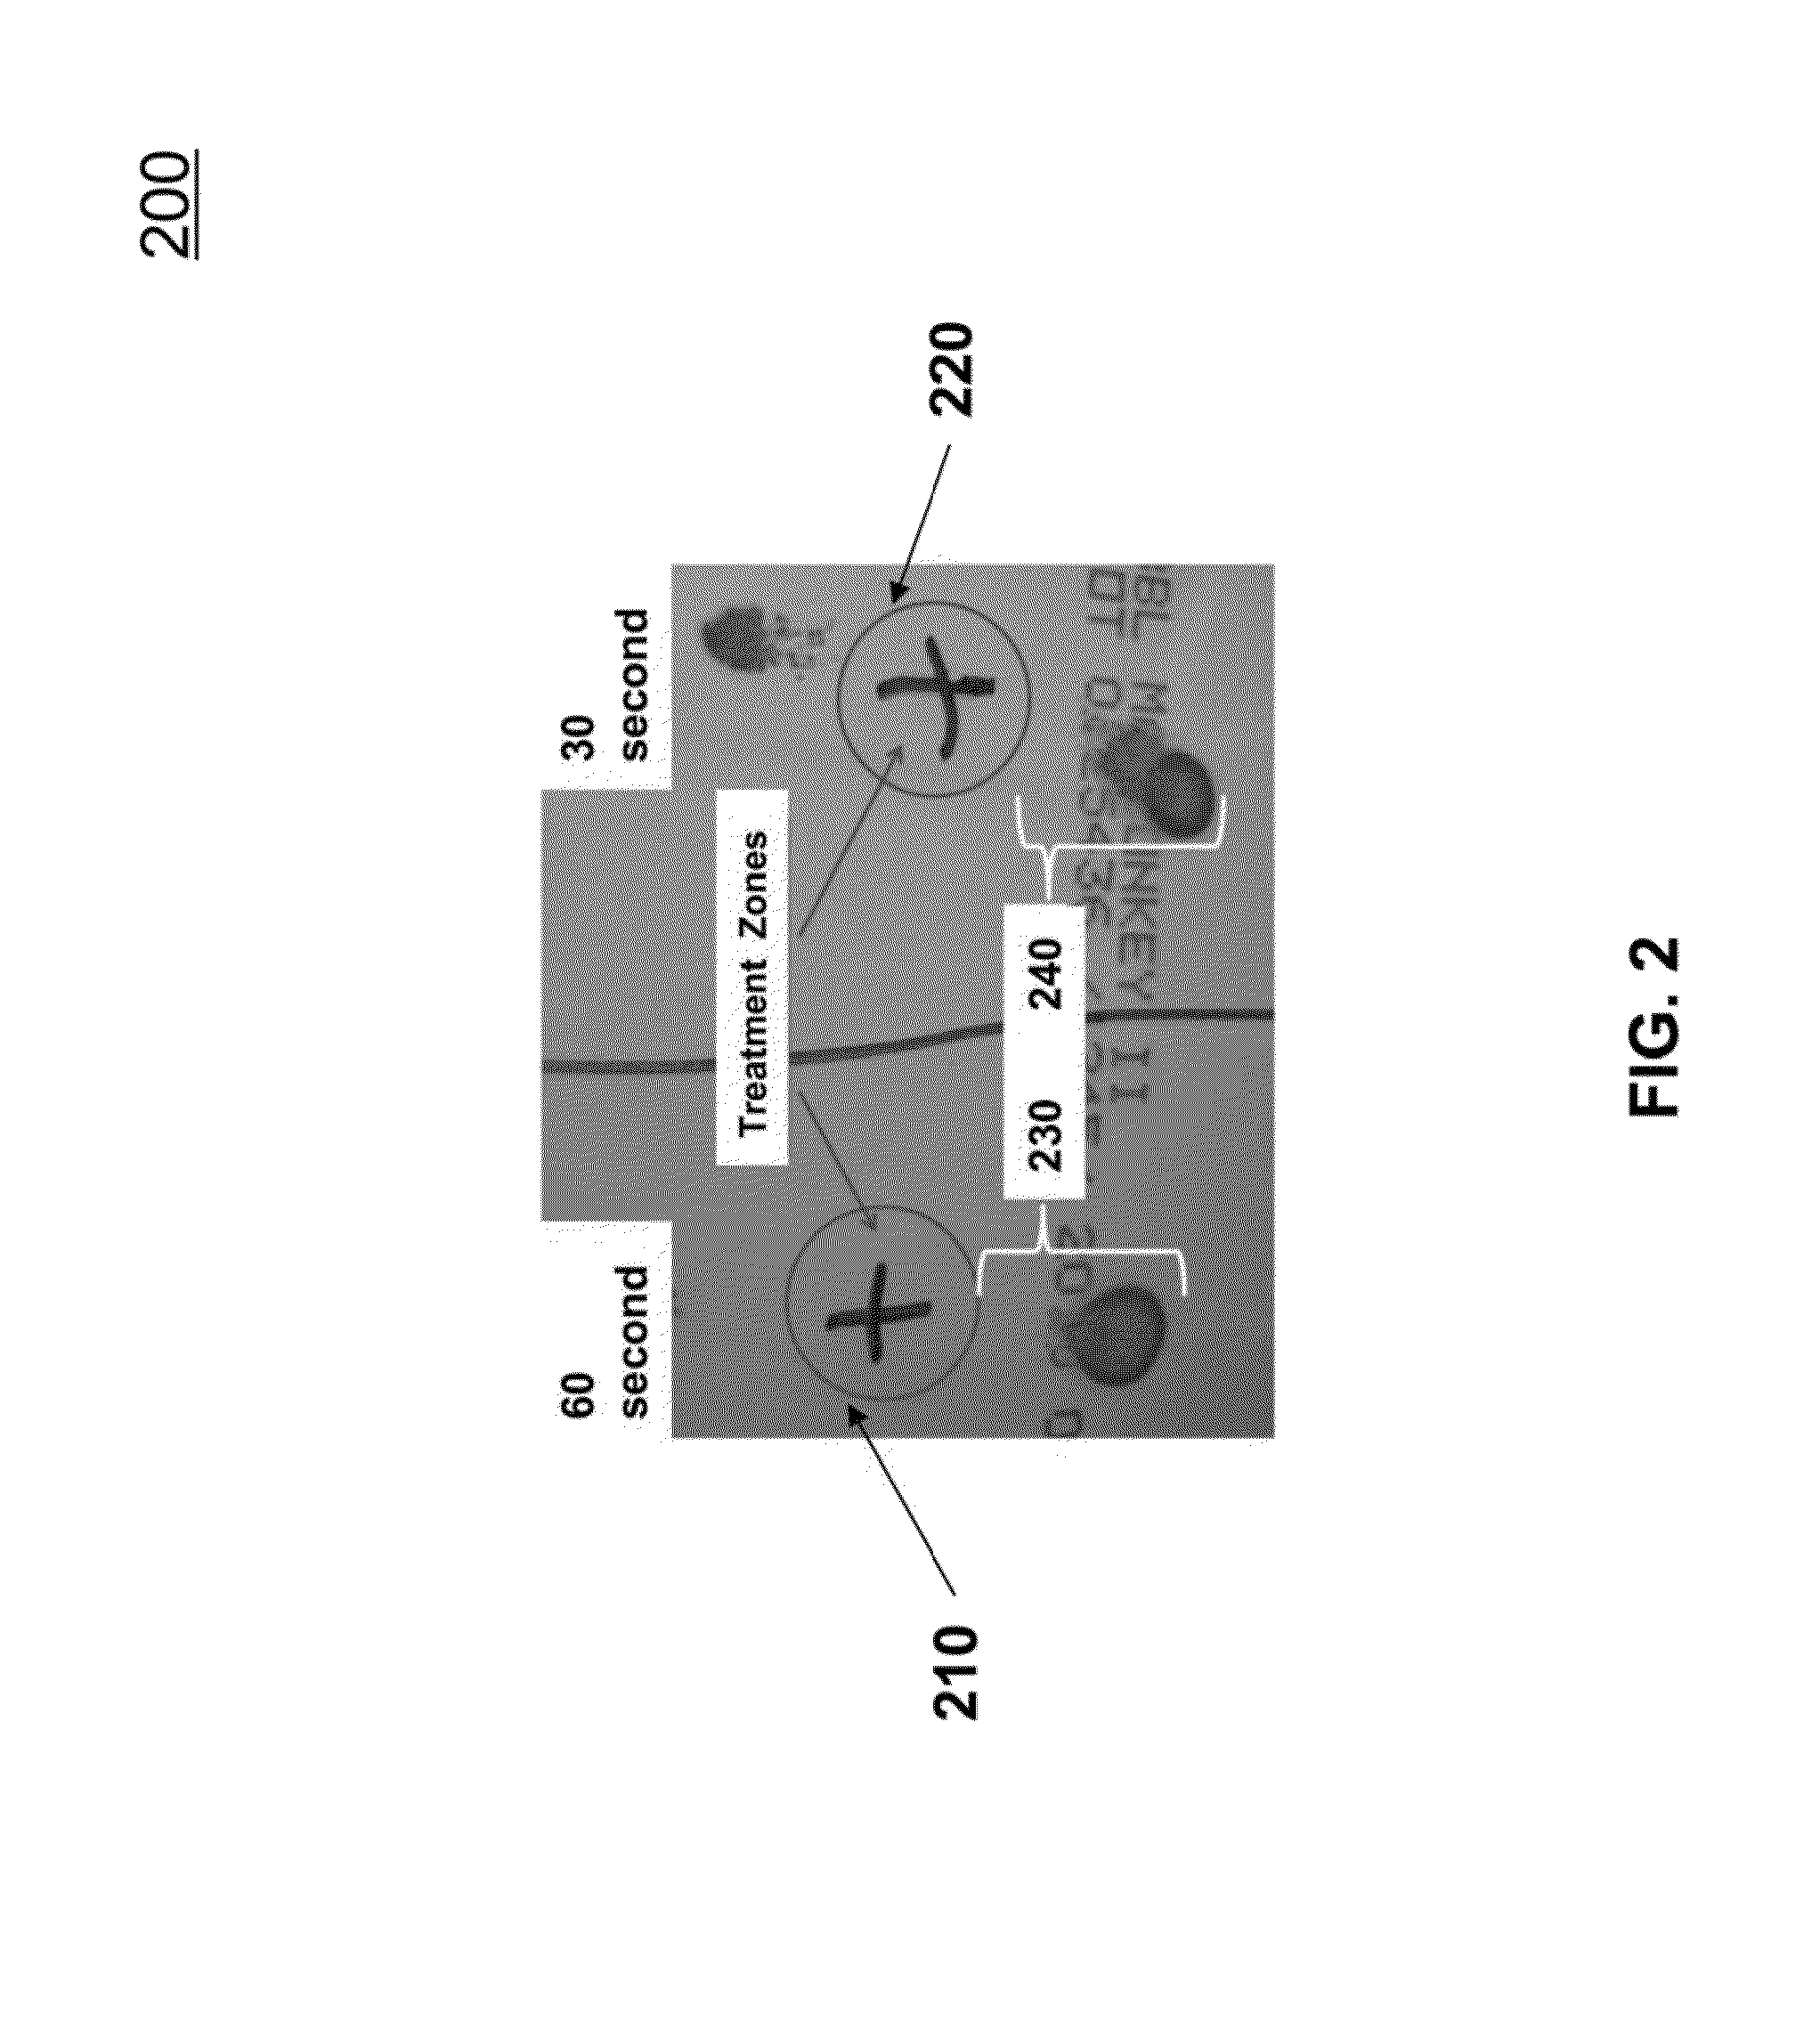 Method and Apparatus for Cold Plasma Food Contact Surface Sanitation